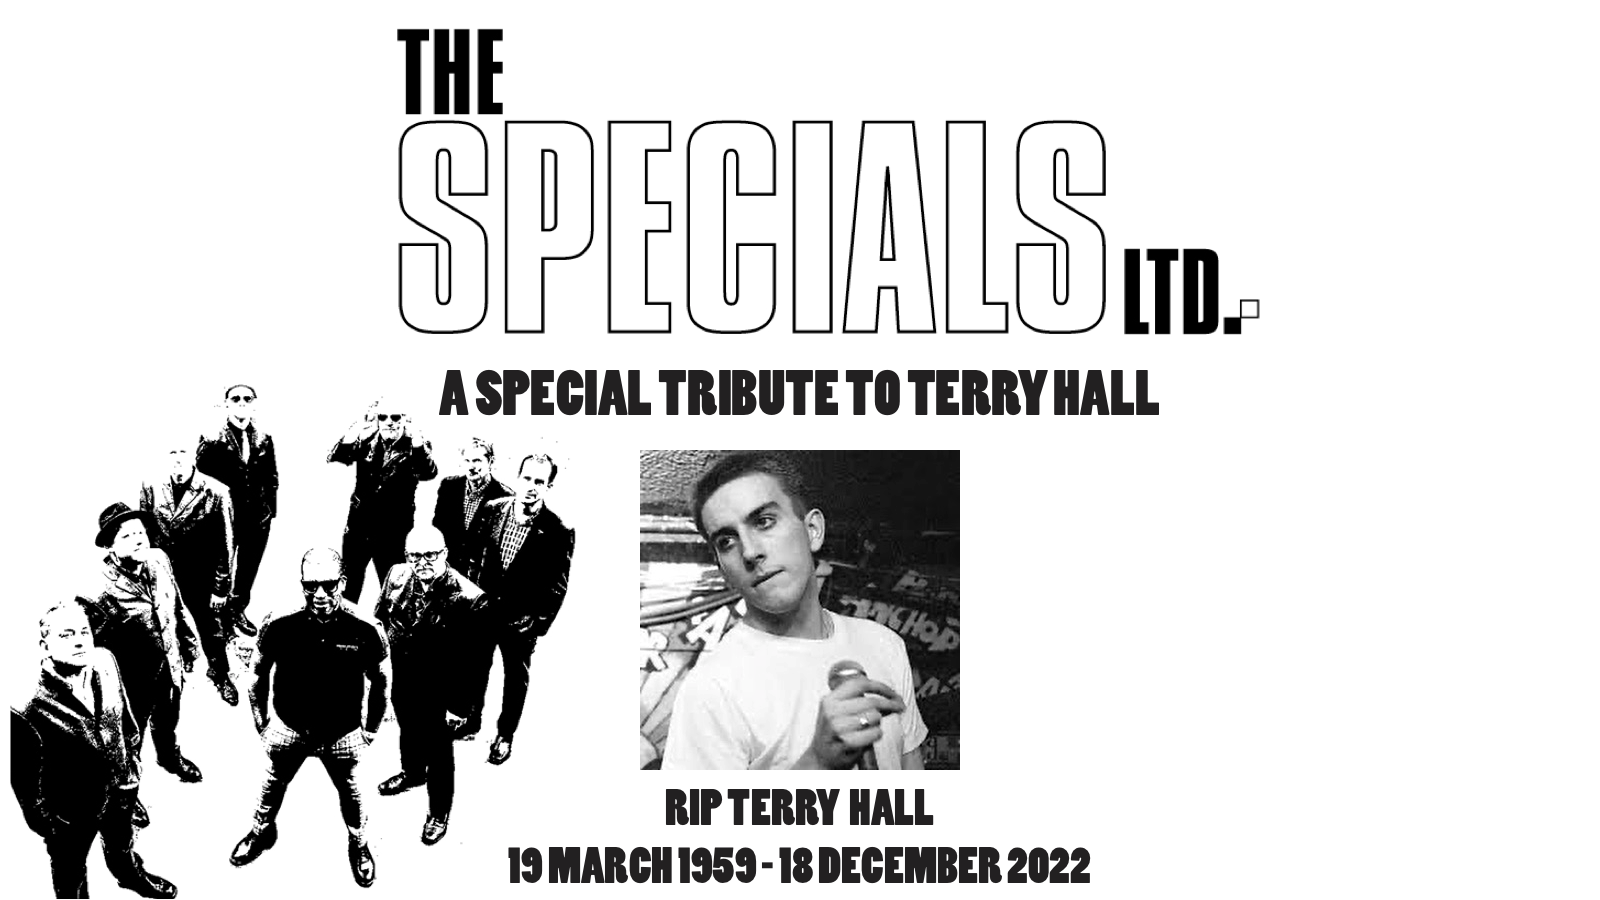 A SPECIAL TRIBUTE TO TERRY HALL – live with 9-piece band THE SPECIALS LTD